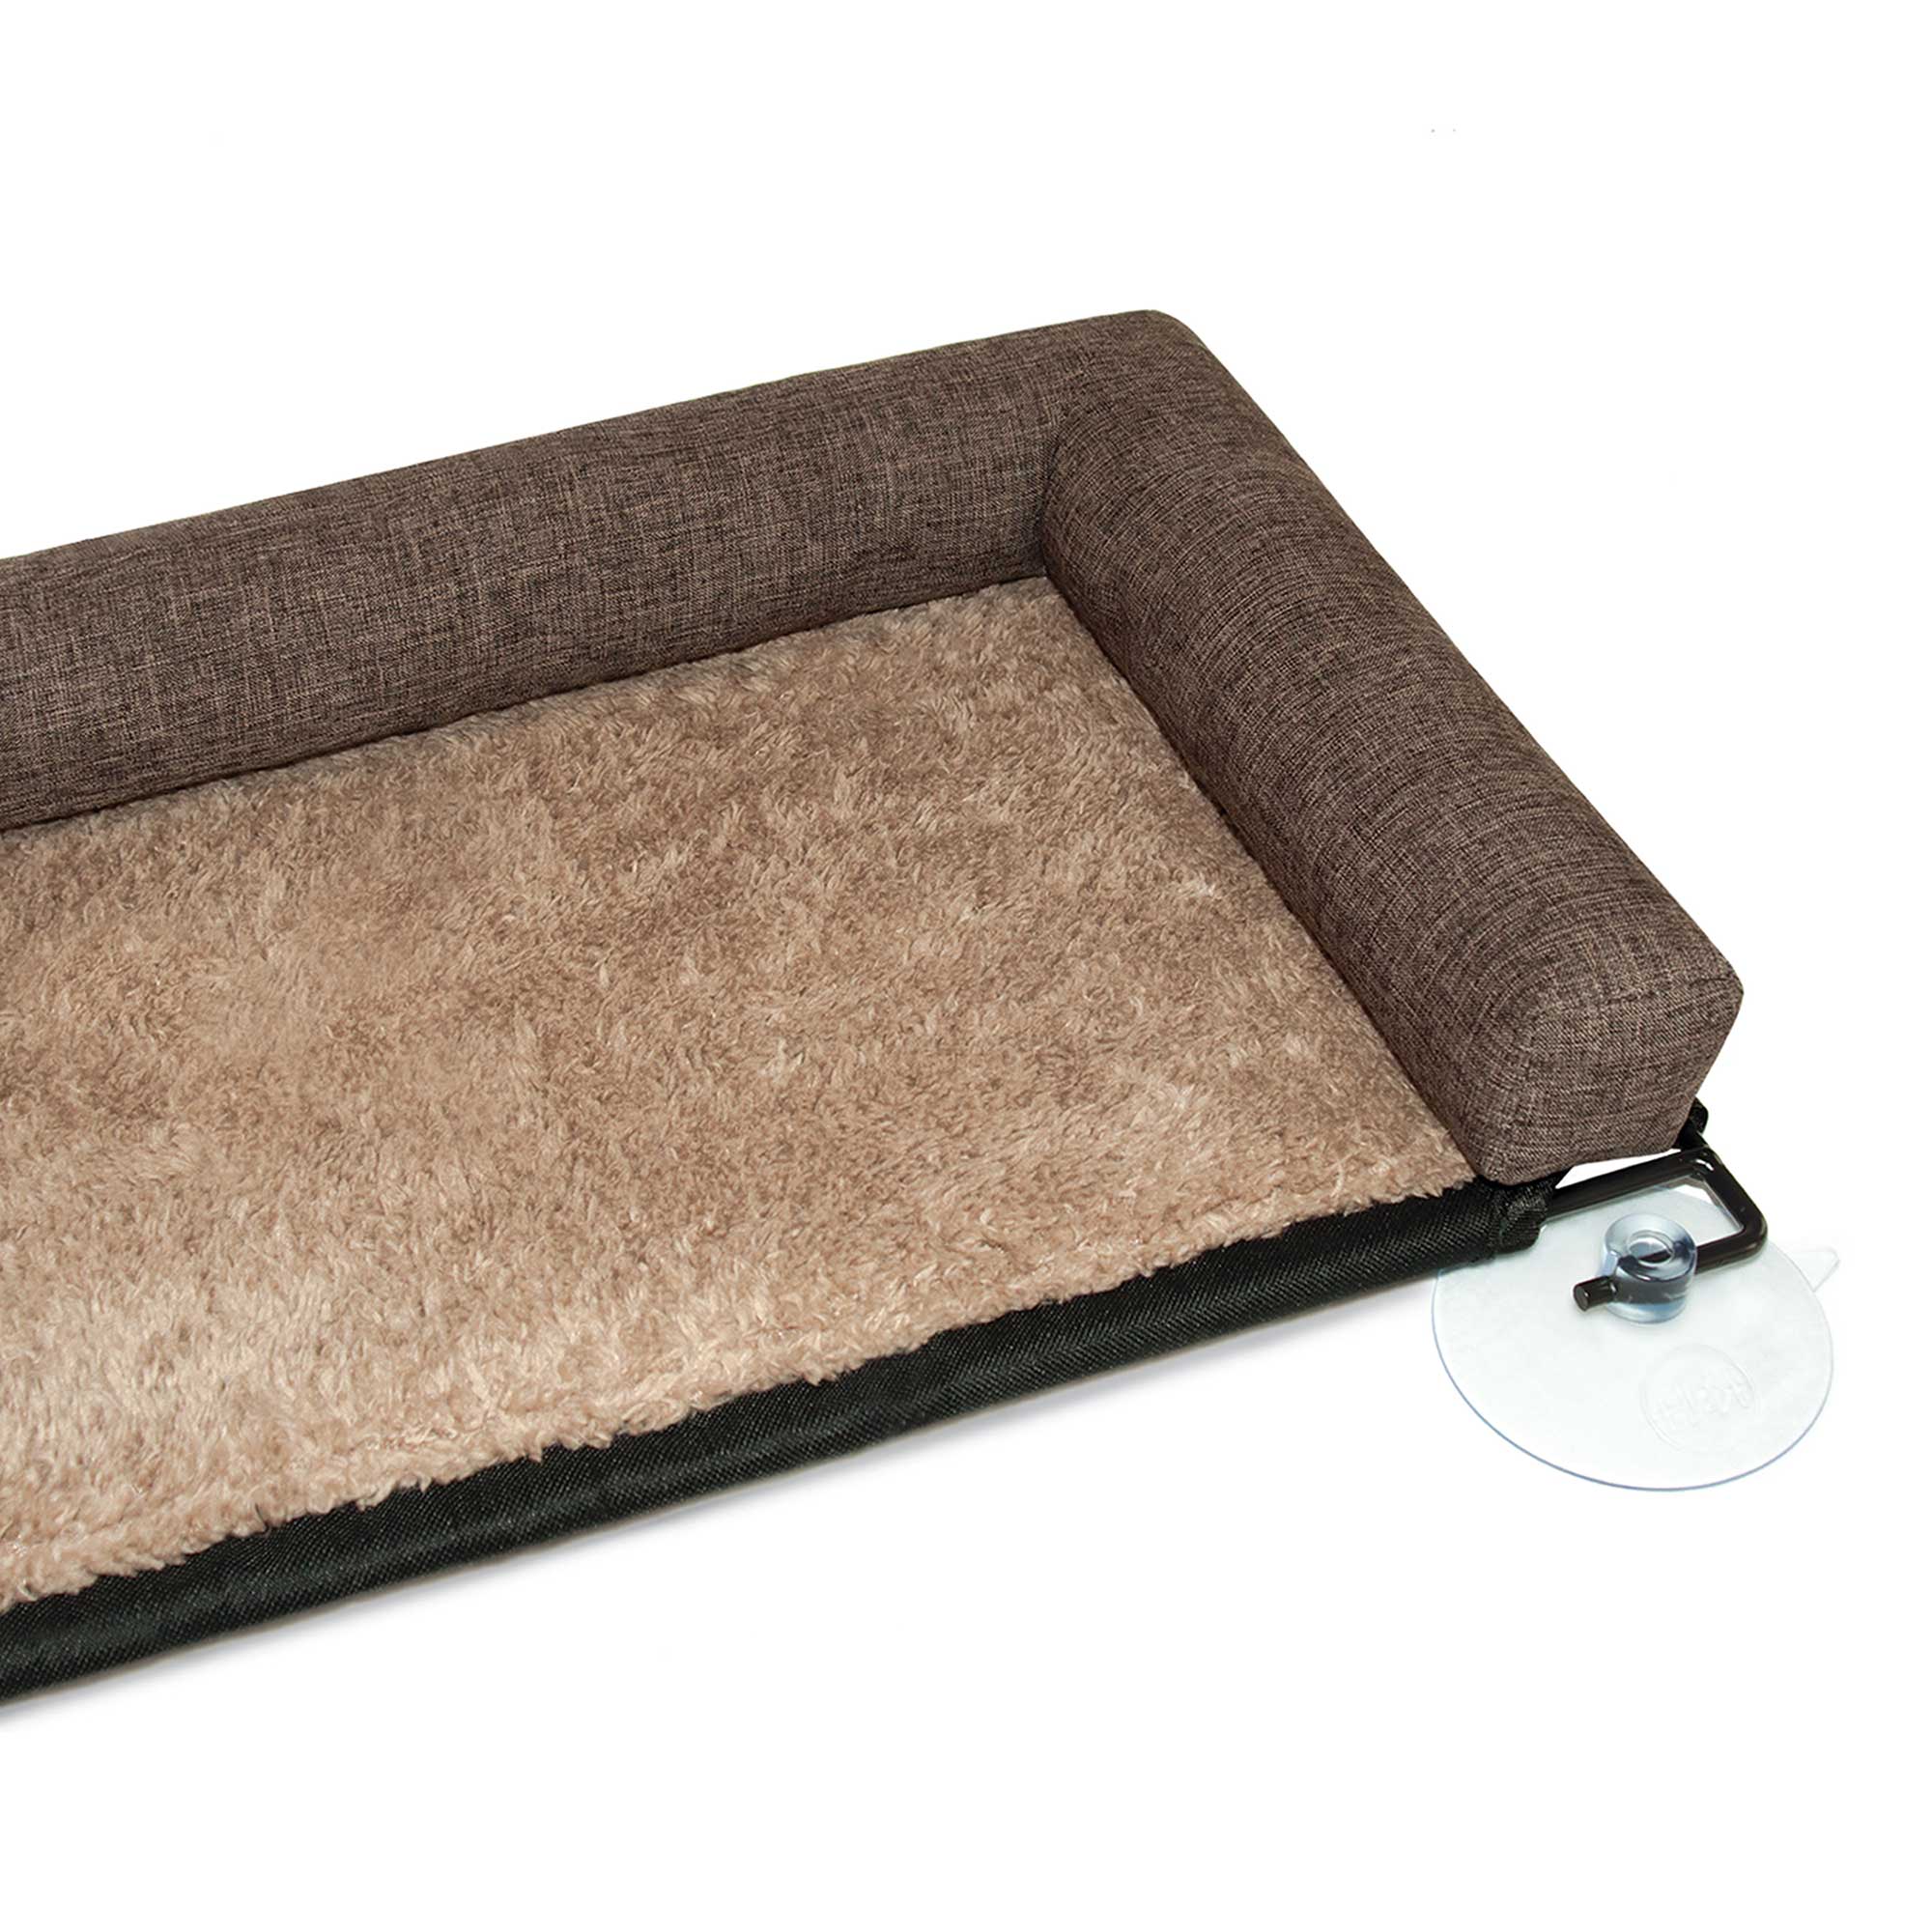 K&H Pet Products EZ Mount Kitty Sill Deluxe with Bolster Brown 12″ x 23″ x 2.5″ – KH9090